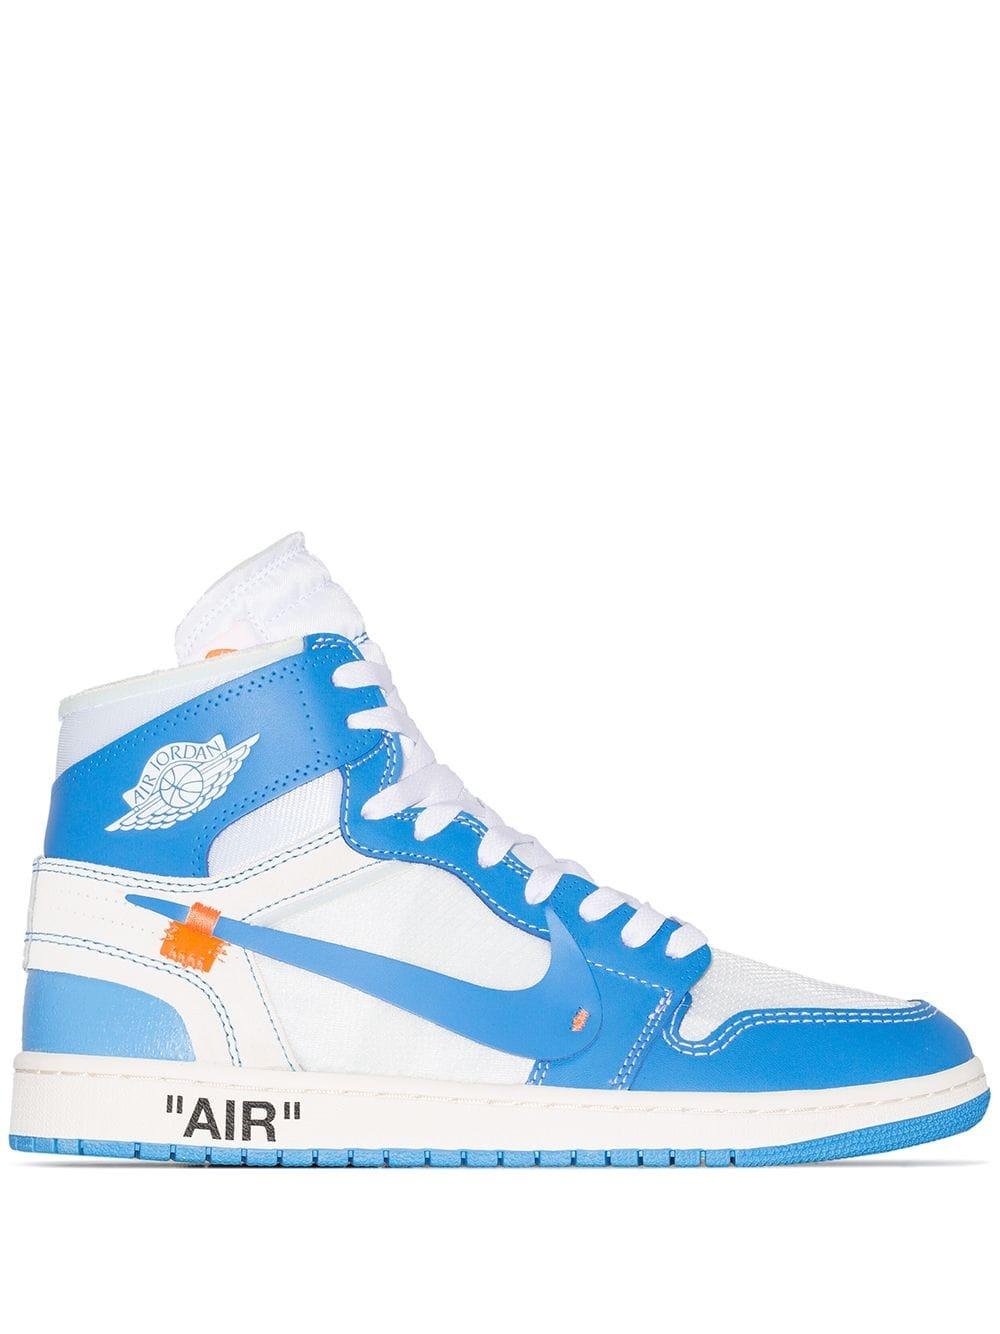 off white shoes nike high tops